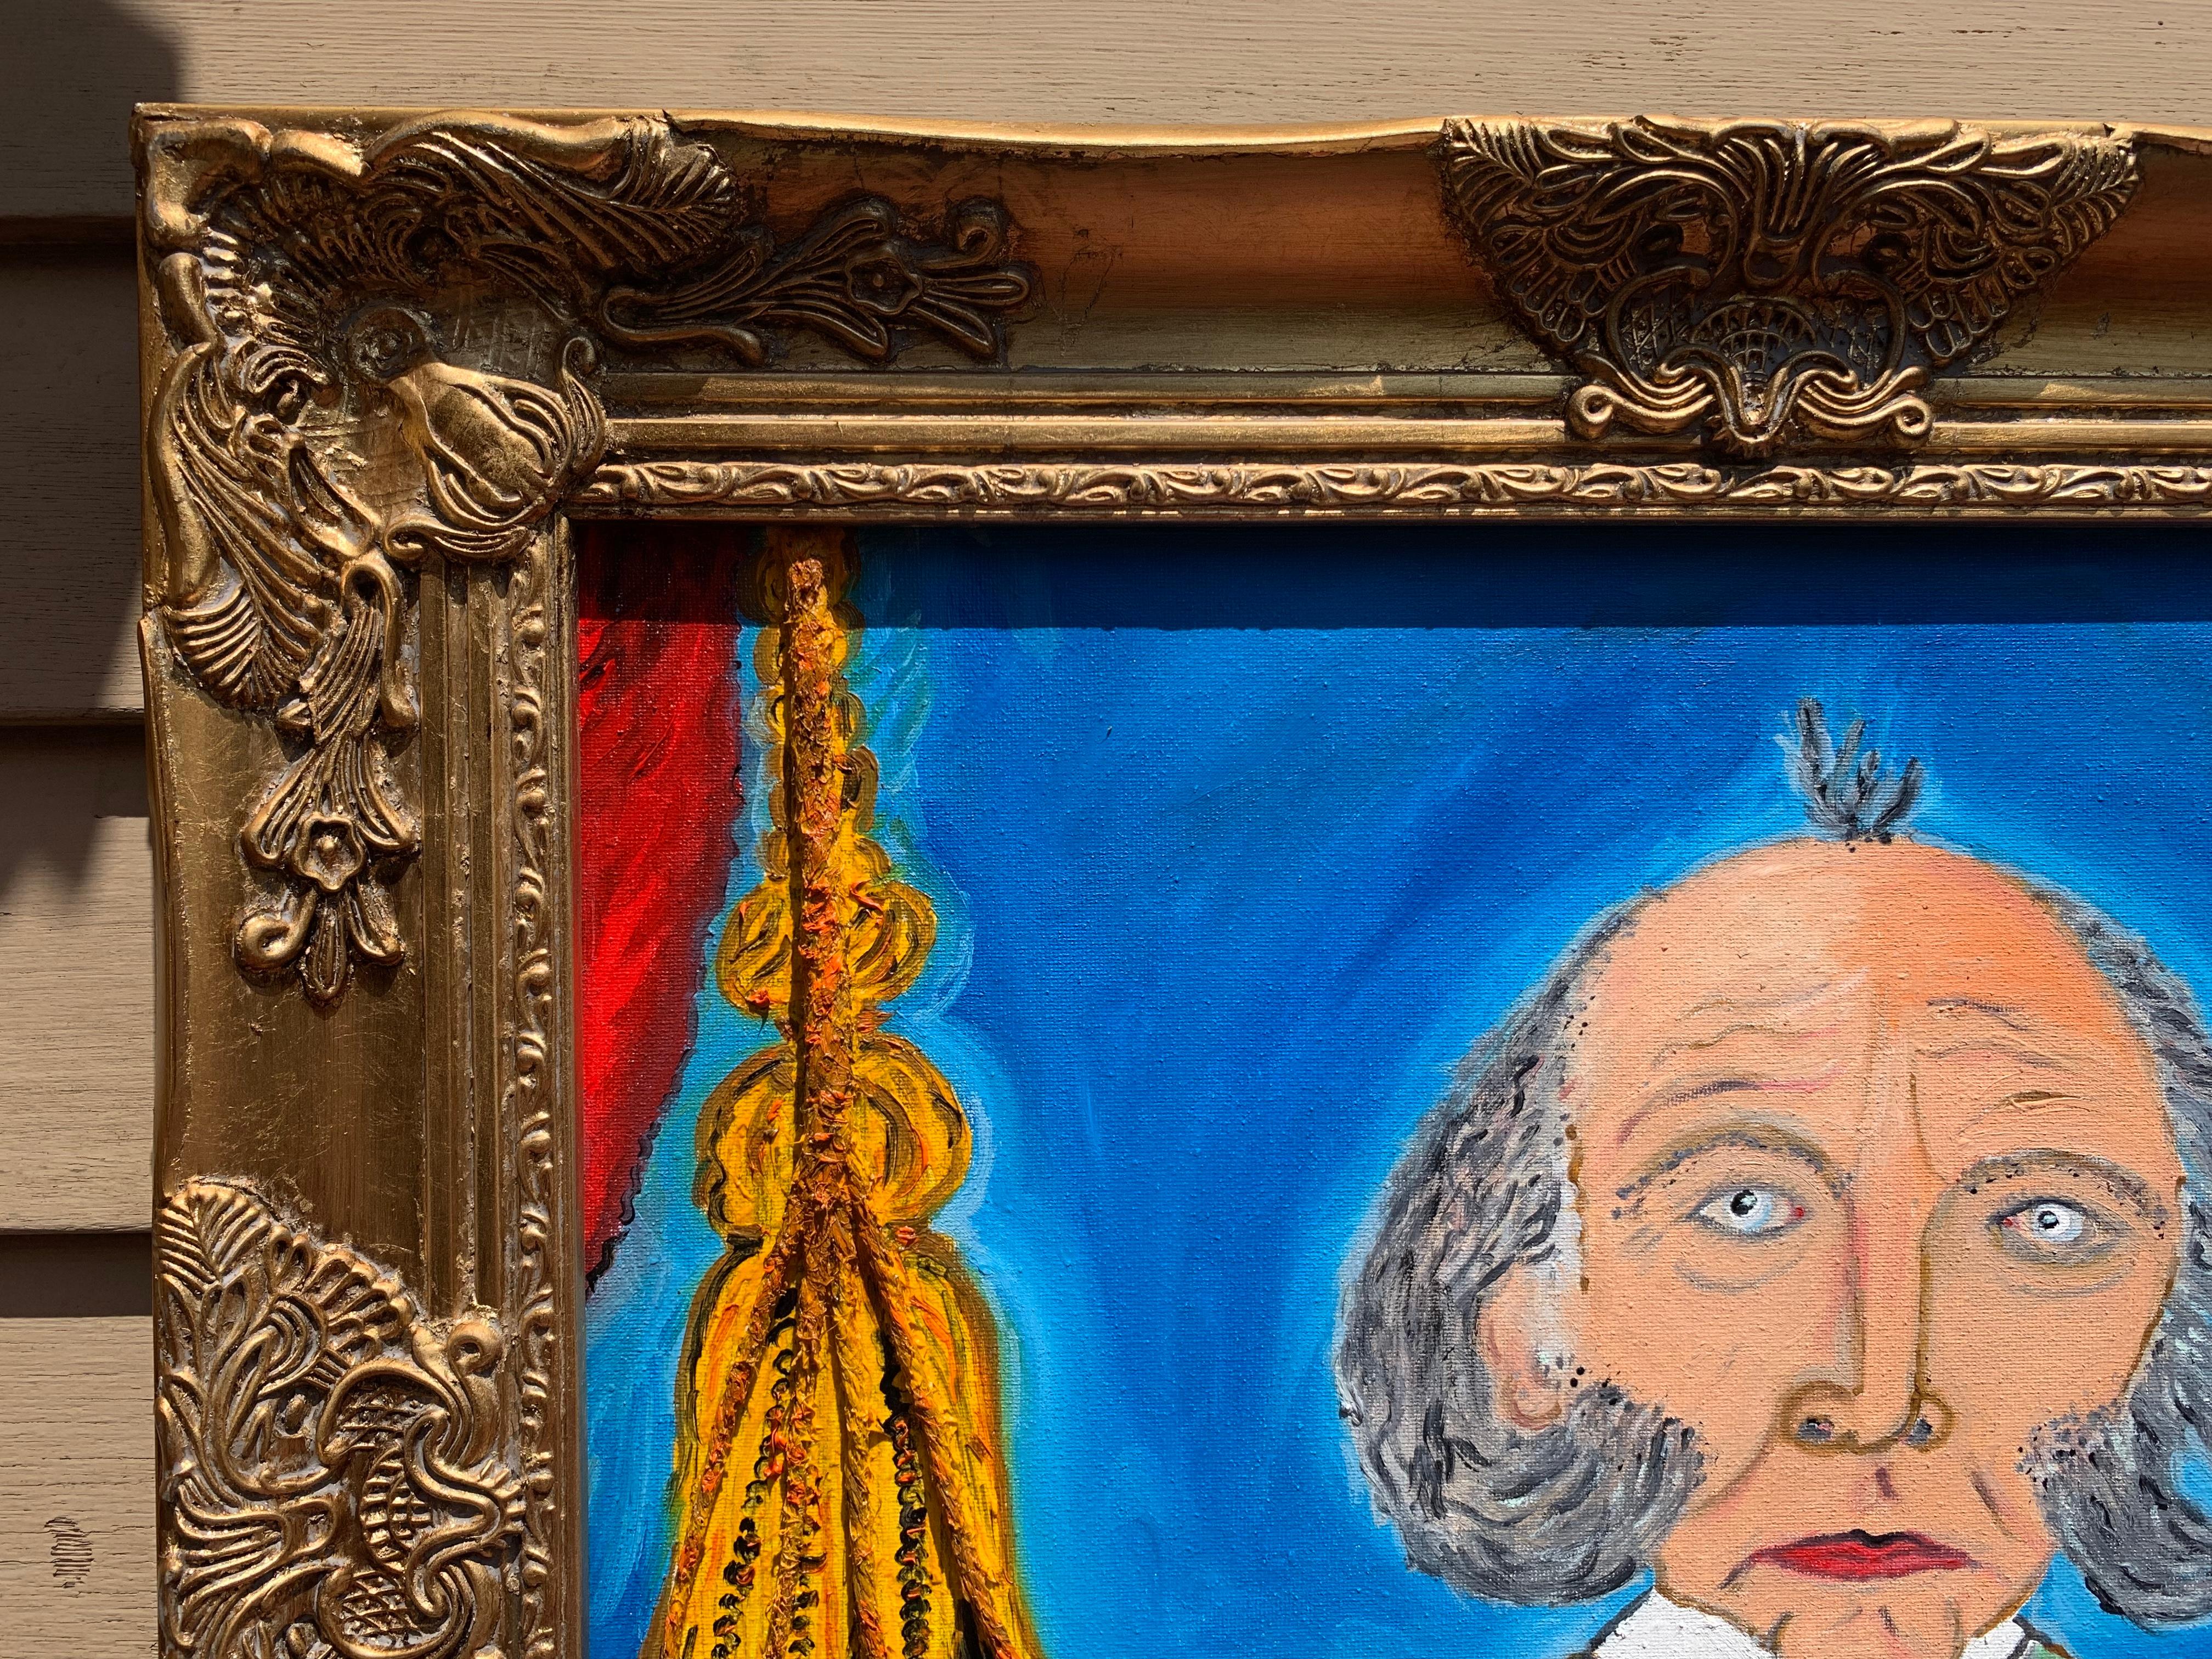 This is a rare unique original acrylic/oil painting on canvas in a naive primitivism style depicting Martin Van Buren (1782-1862) Martin Van Buren was the 8th President of the United States.

Present in an ornate gilt frame. Excellent condition.